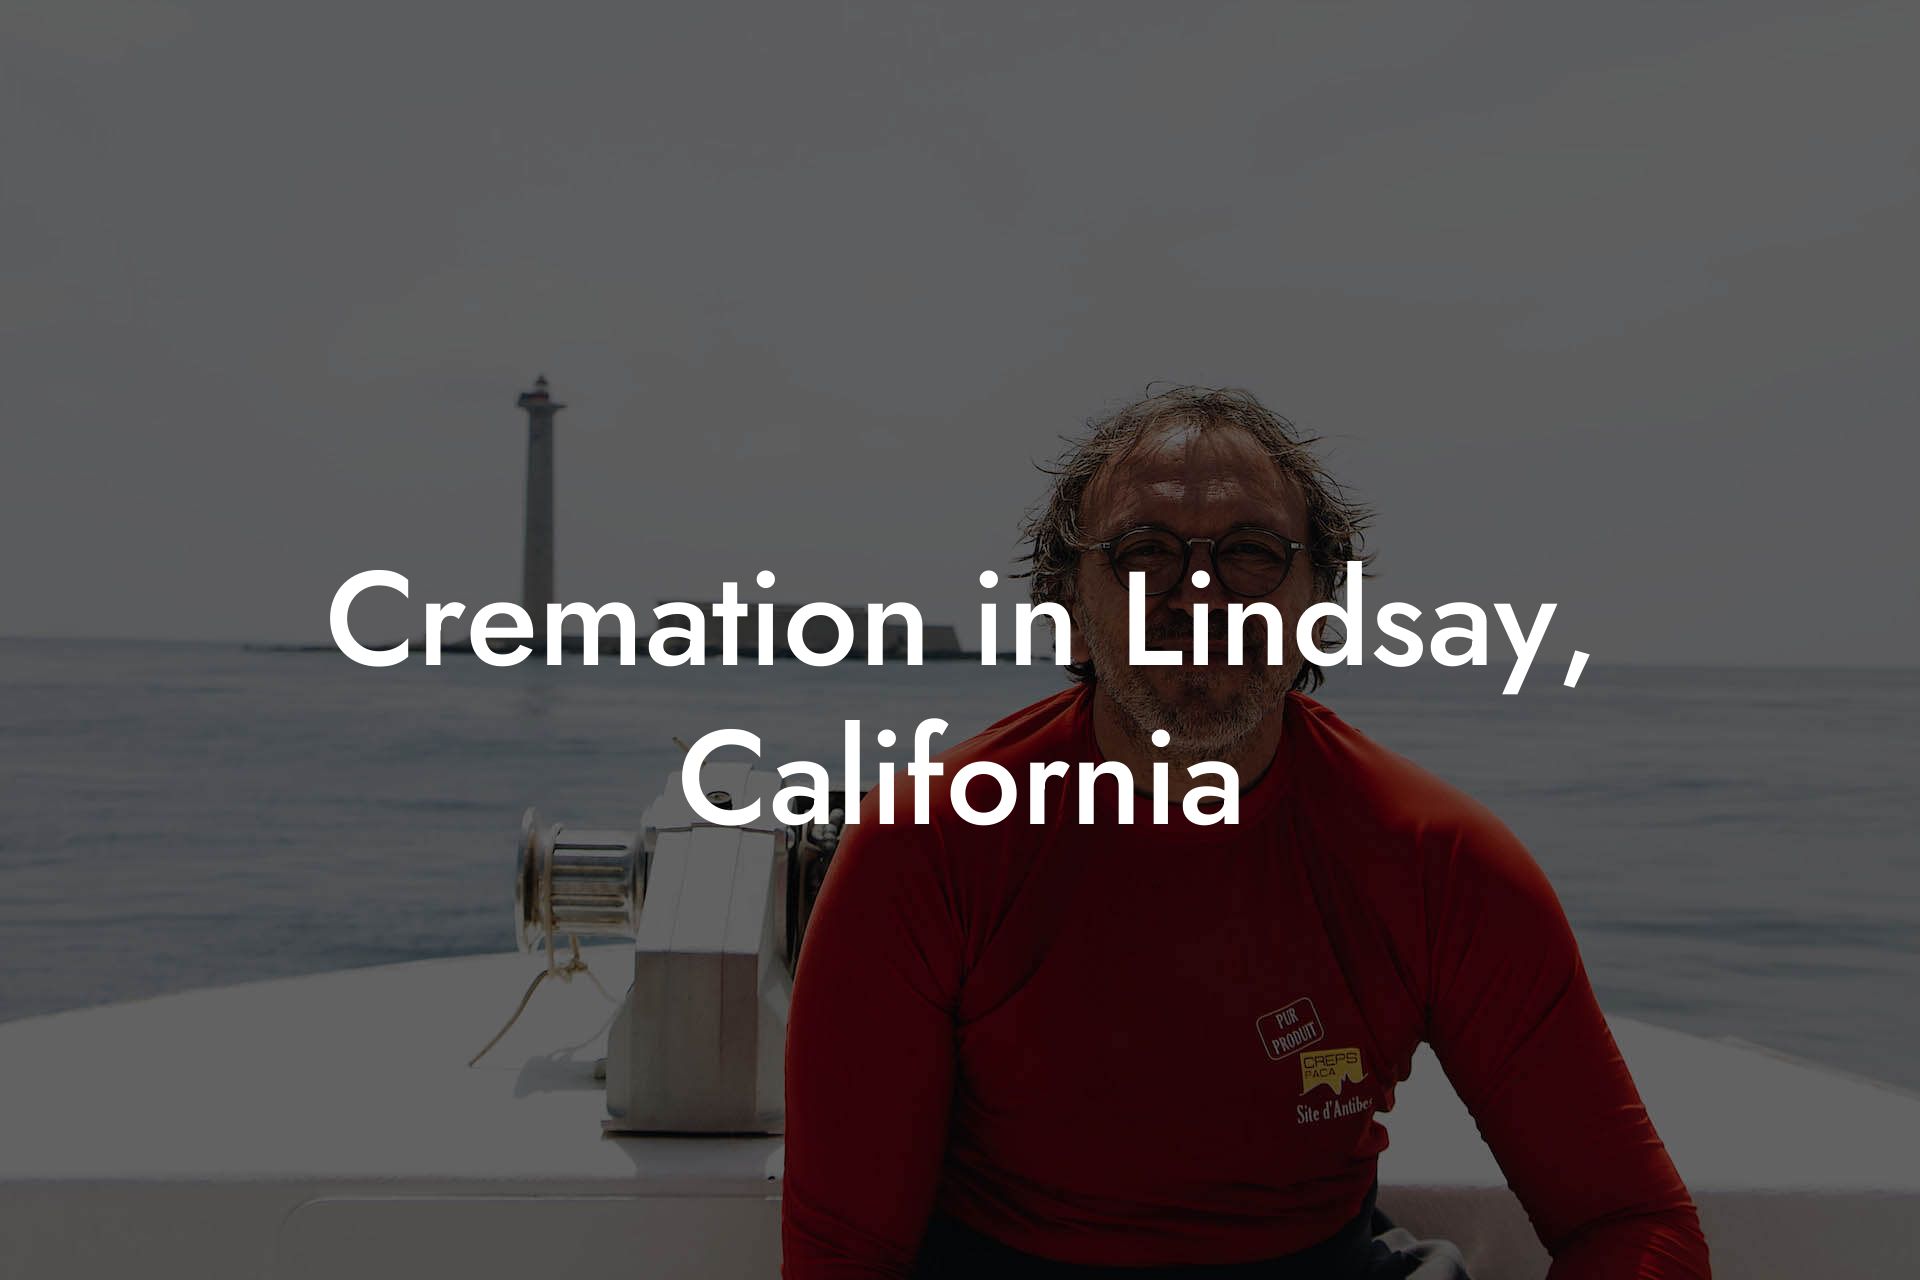 Cremation in Lindsay, California